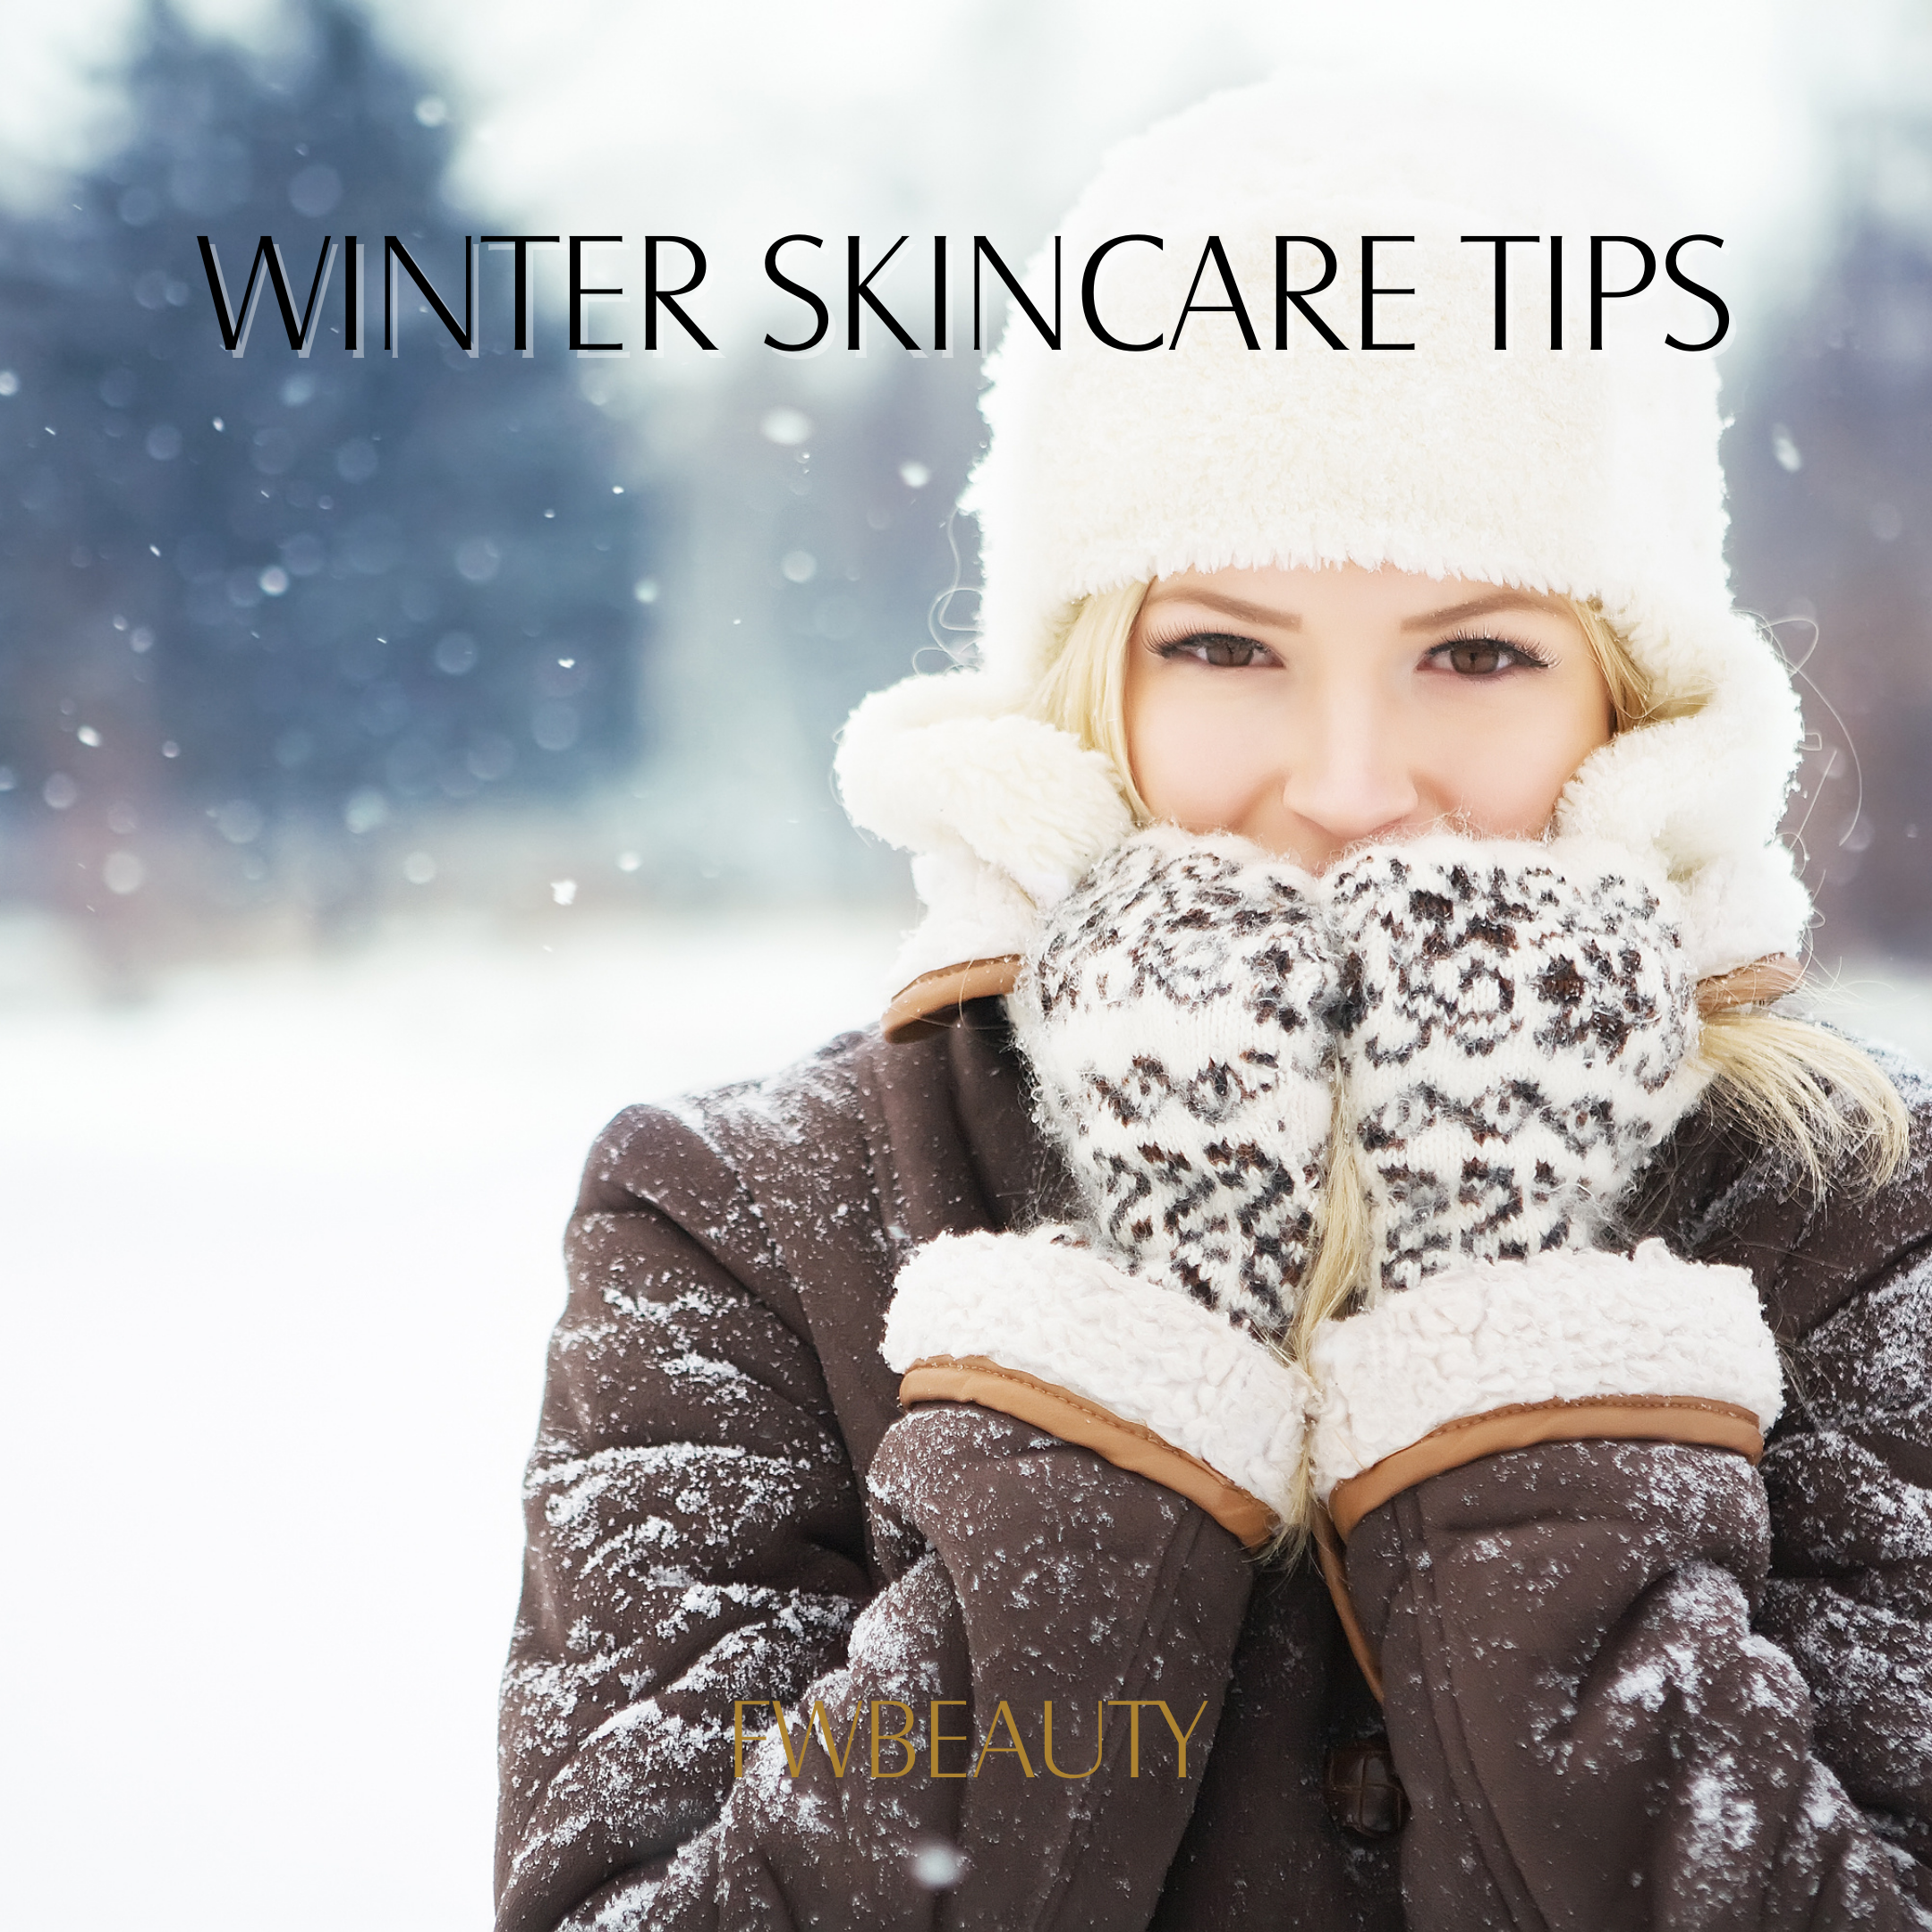 SKINCARE DURING WINTER - Tips from our Experts